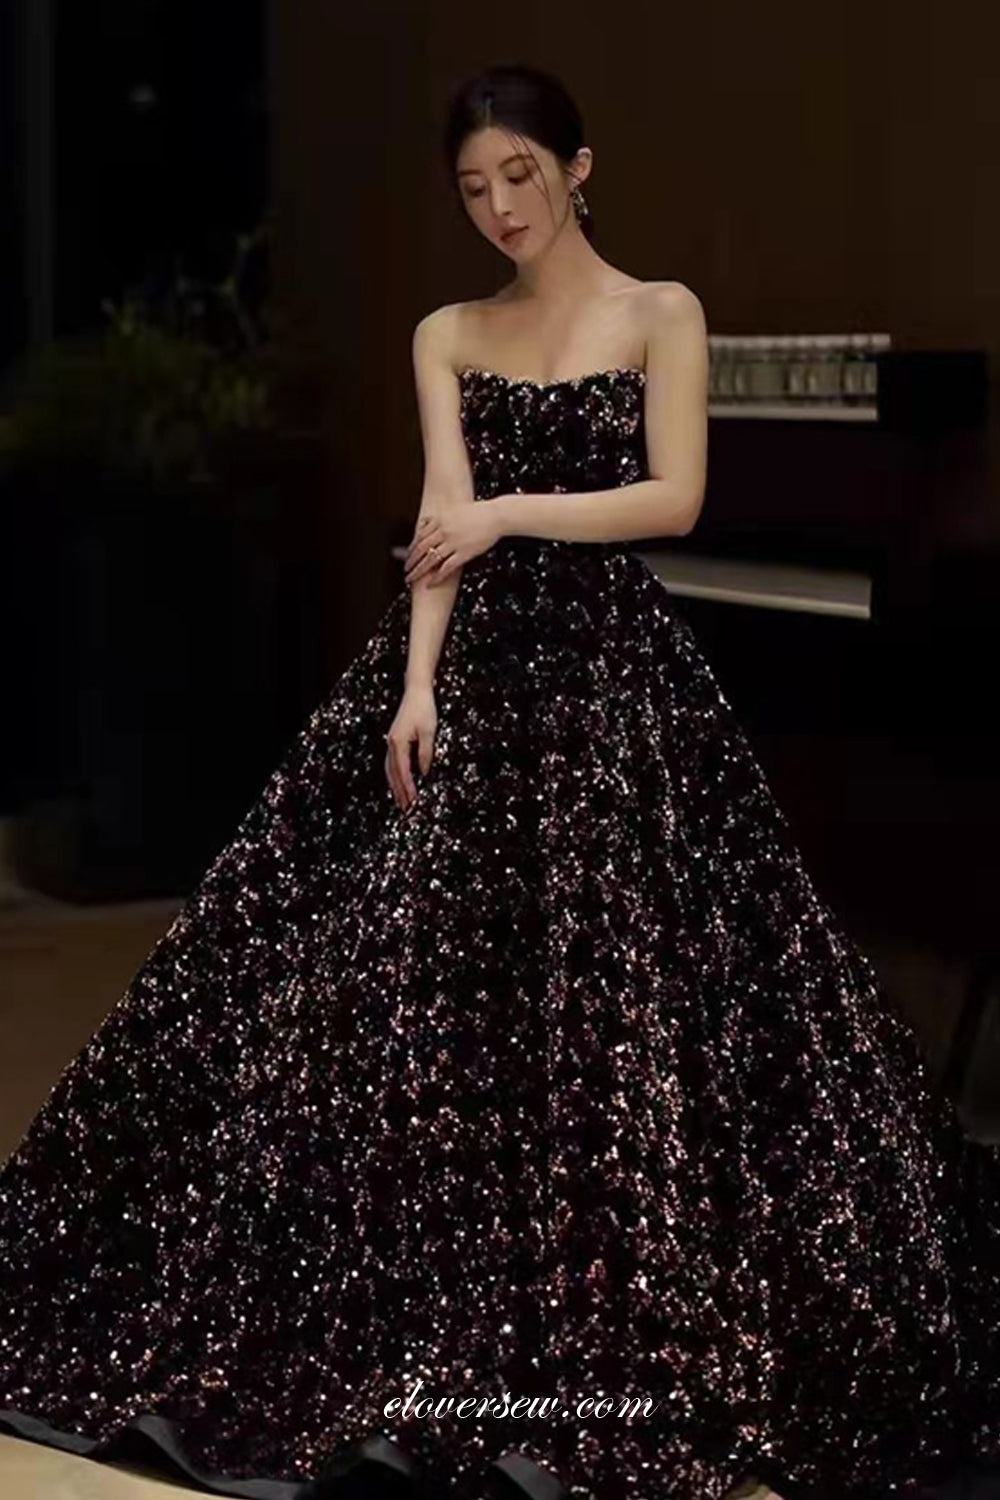 Shiny 3D Sequined Strapless Ball Gown Evening Dresses, CP0755